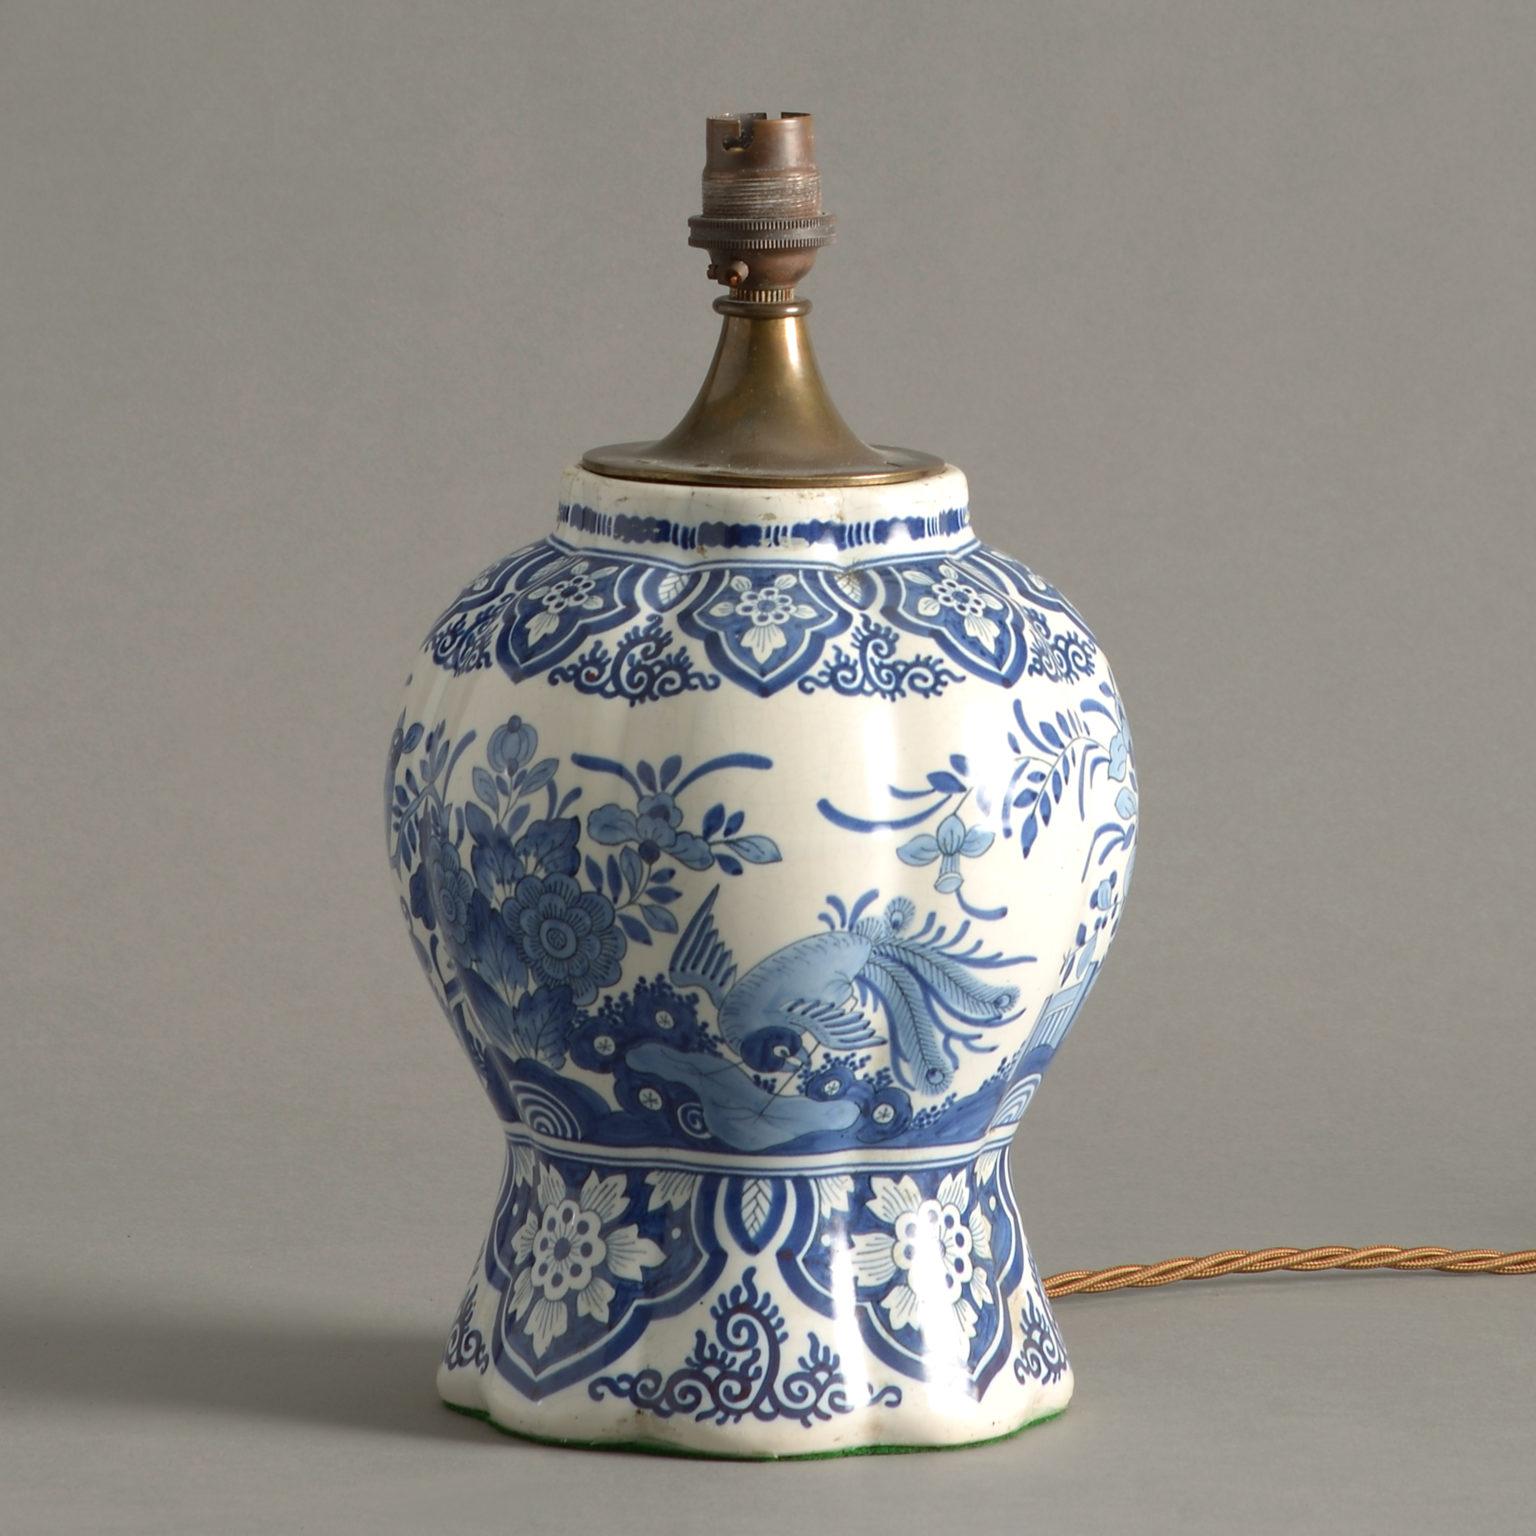 A 19th century delft pottery baluster vase, decorated throughout with chinoiserie and now electrified as a table lamp.